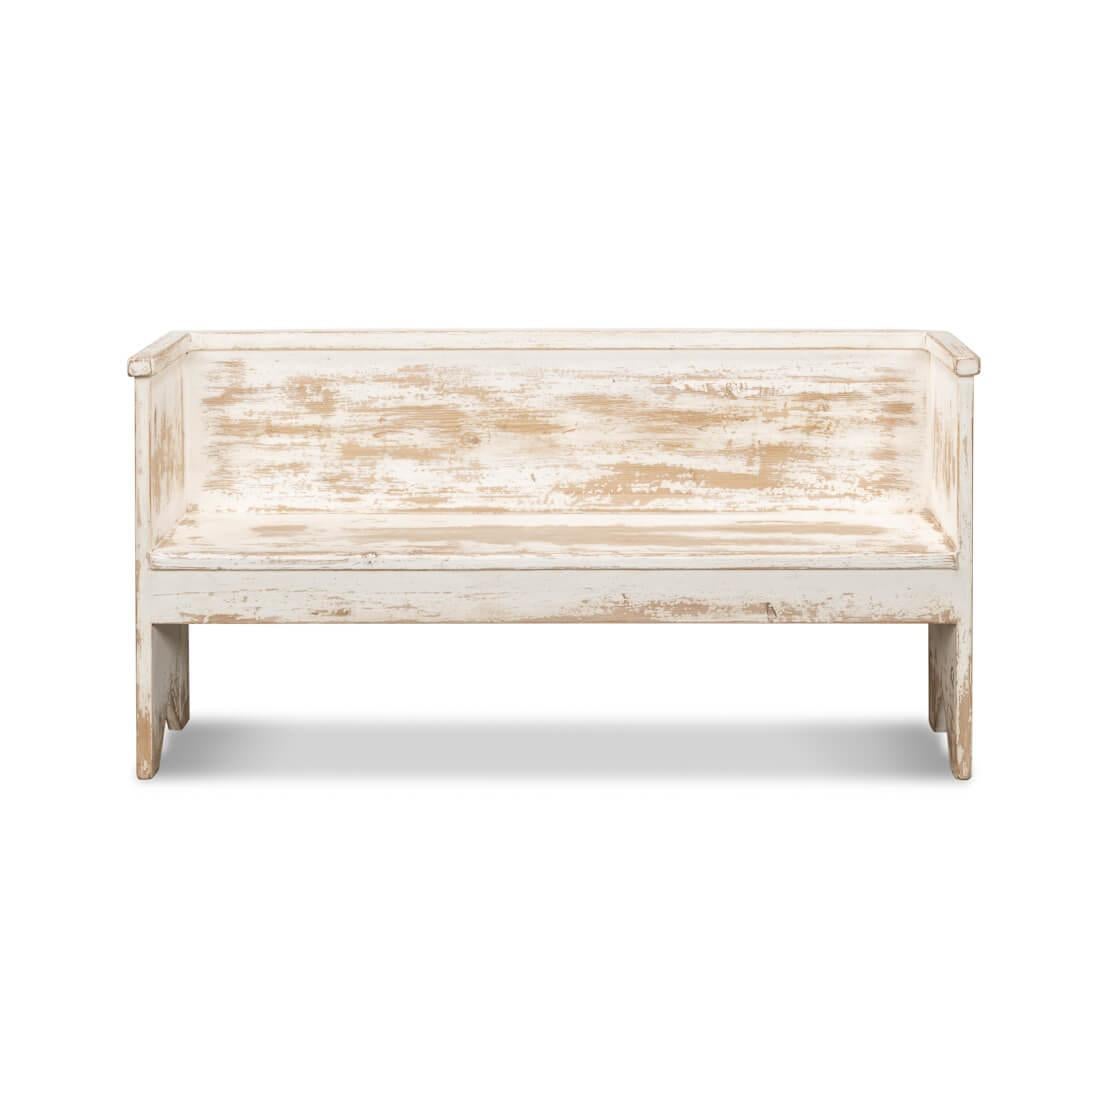 A harmonious blend of functionality and farmhouse charm. This cozy seating solution is designed to bring a touch of rustic warmth to your home. The distressed white painted finish gives it a lived-in look, as if it's already hosted many a family